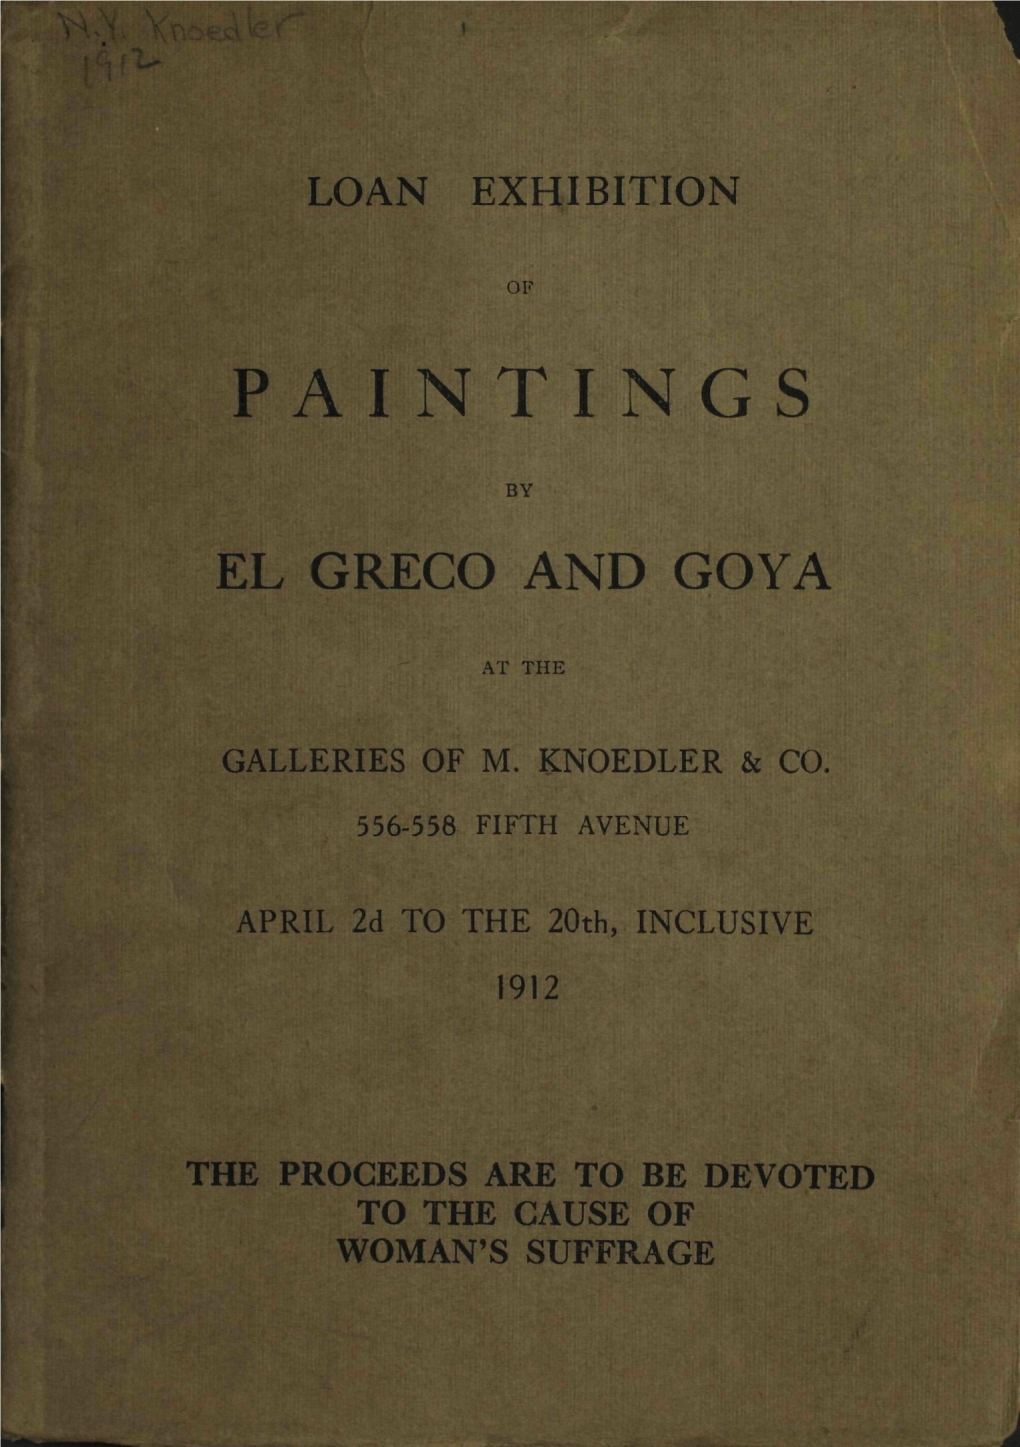 Loan Exhibition of Paintings by El Greco and Goya, at the Galleries Of